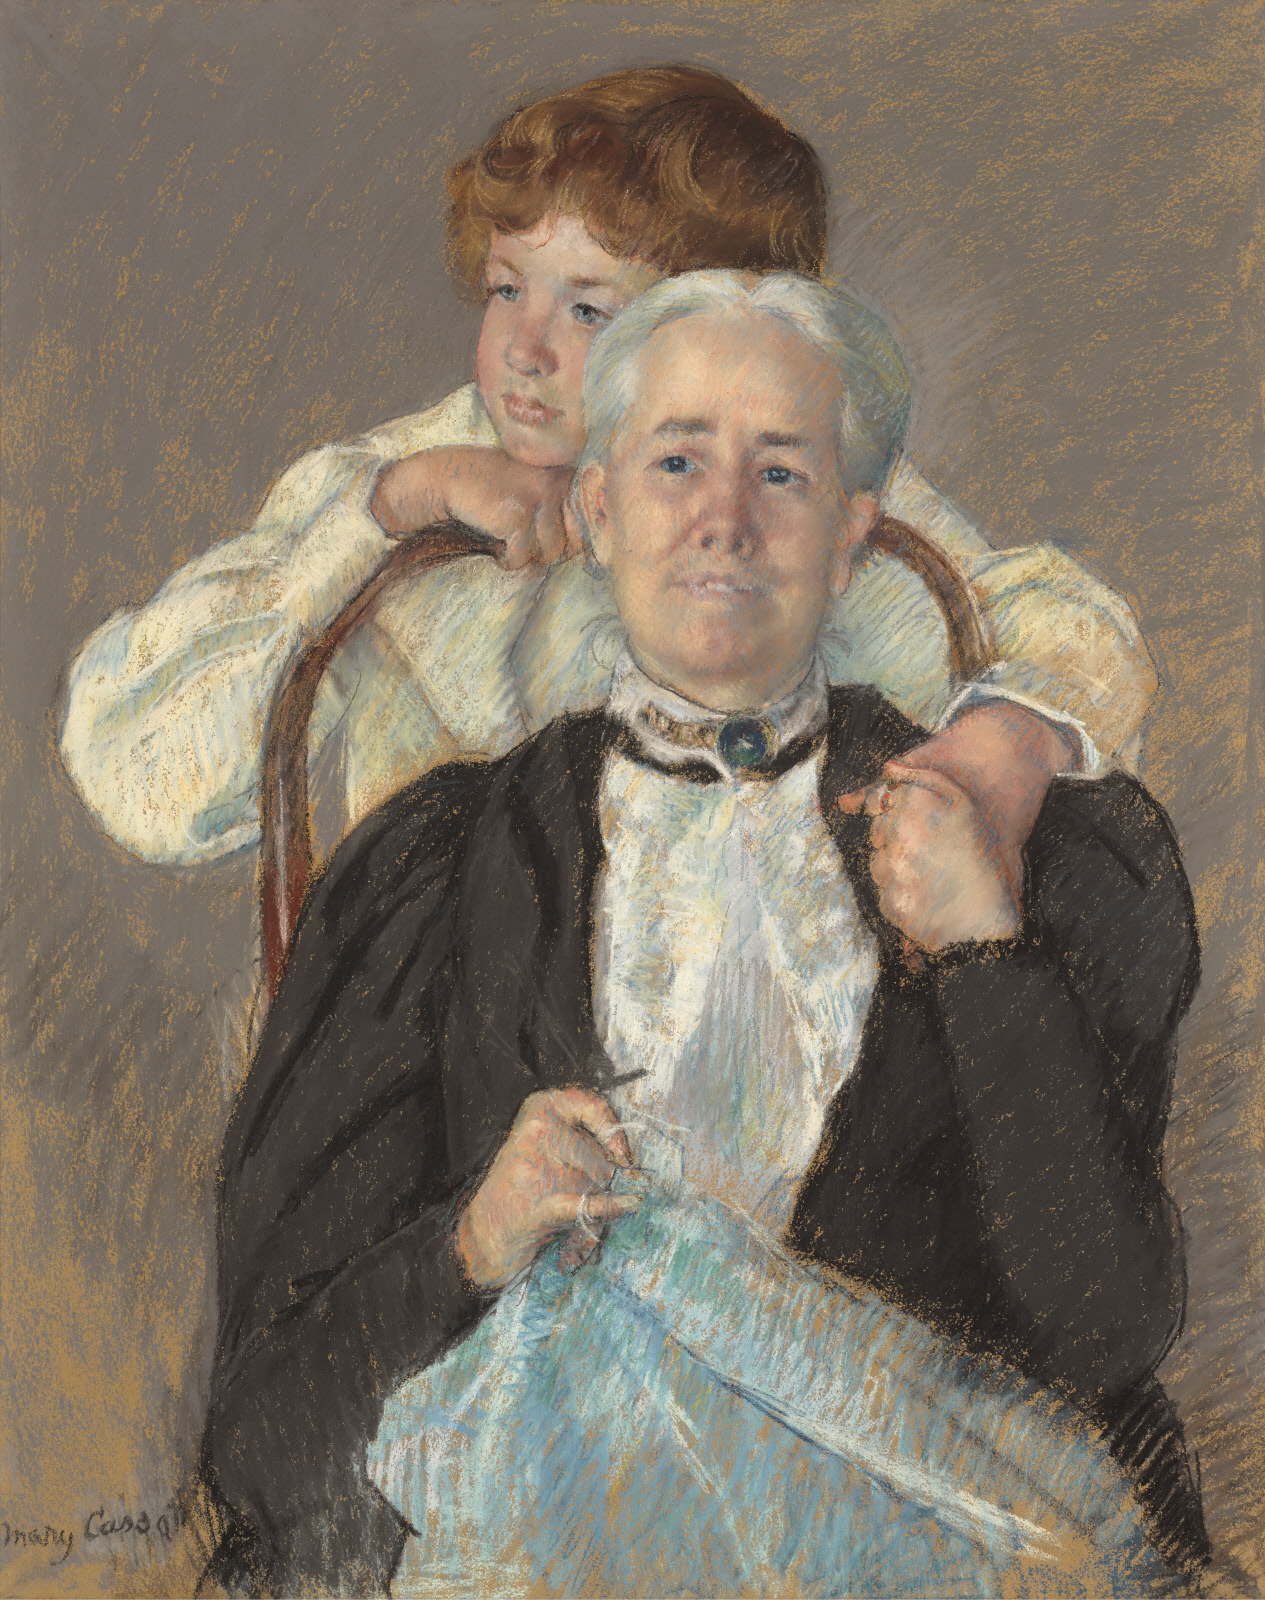 Portrait of Mrs. Cyrus J. Lawrence with her Grandson by Mary Cassatt - c. 1898 - 71.1 x 58.4 cm The Clark